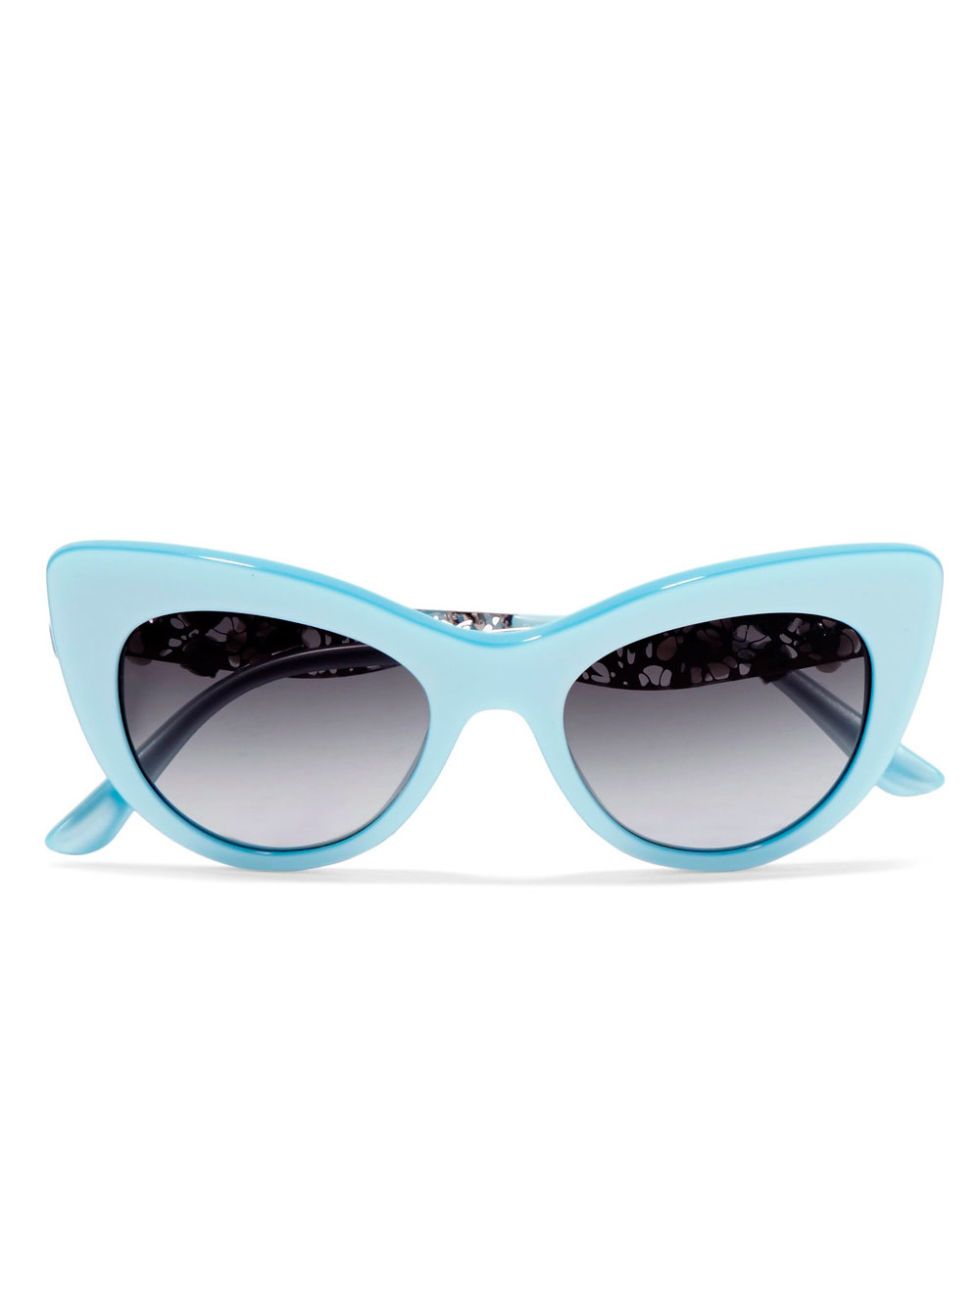 Eyewear, Sunglasses, Glasses, Aqua, Blue, Personal protective equipment, Product, Turquoise, Green, Vision care, 